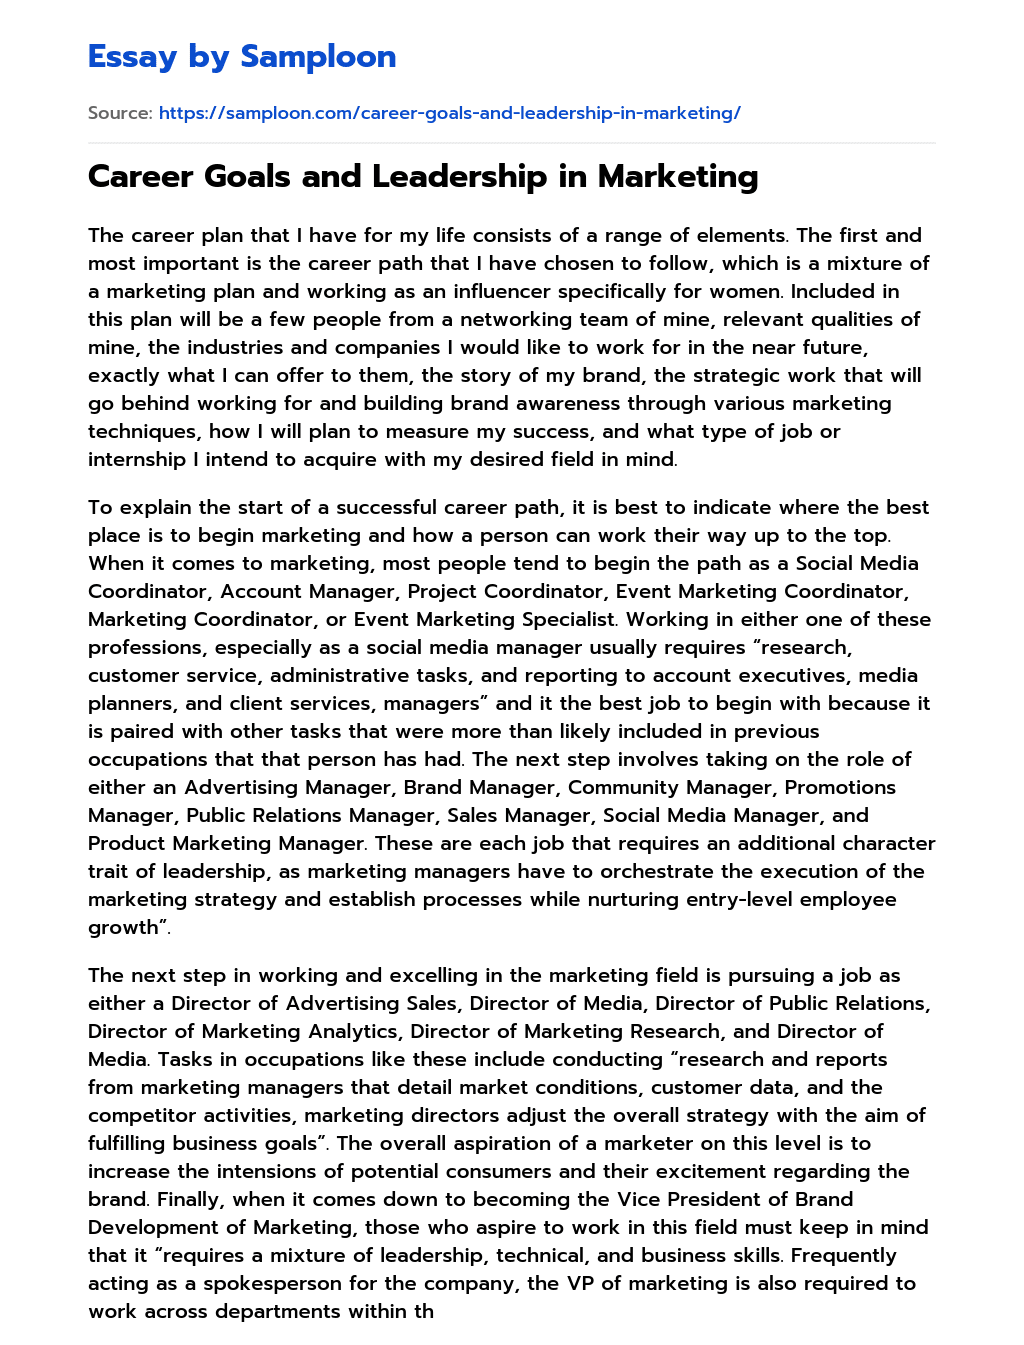 Career Goals and Leadership in Marketing essay